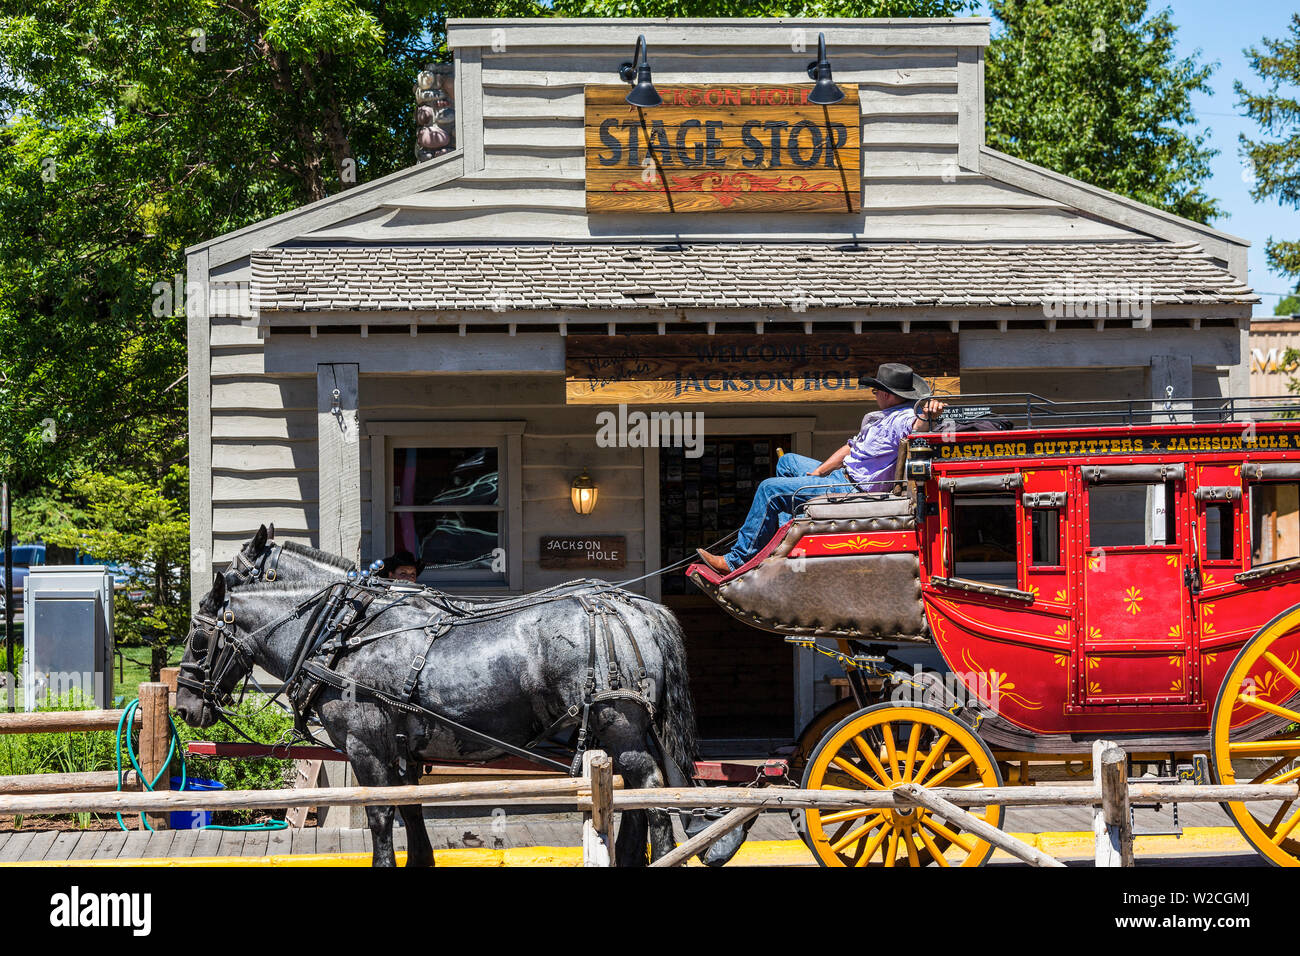 Coach & horses in front of Stage Stop, Jackson Hole, Wyoming, USA Stock Photo